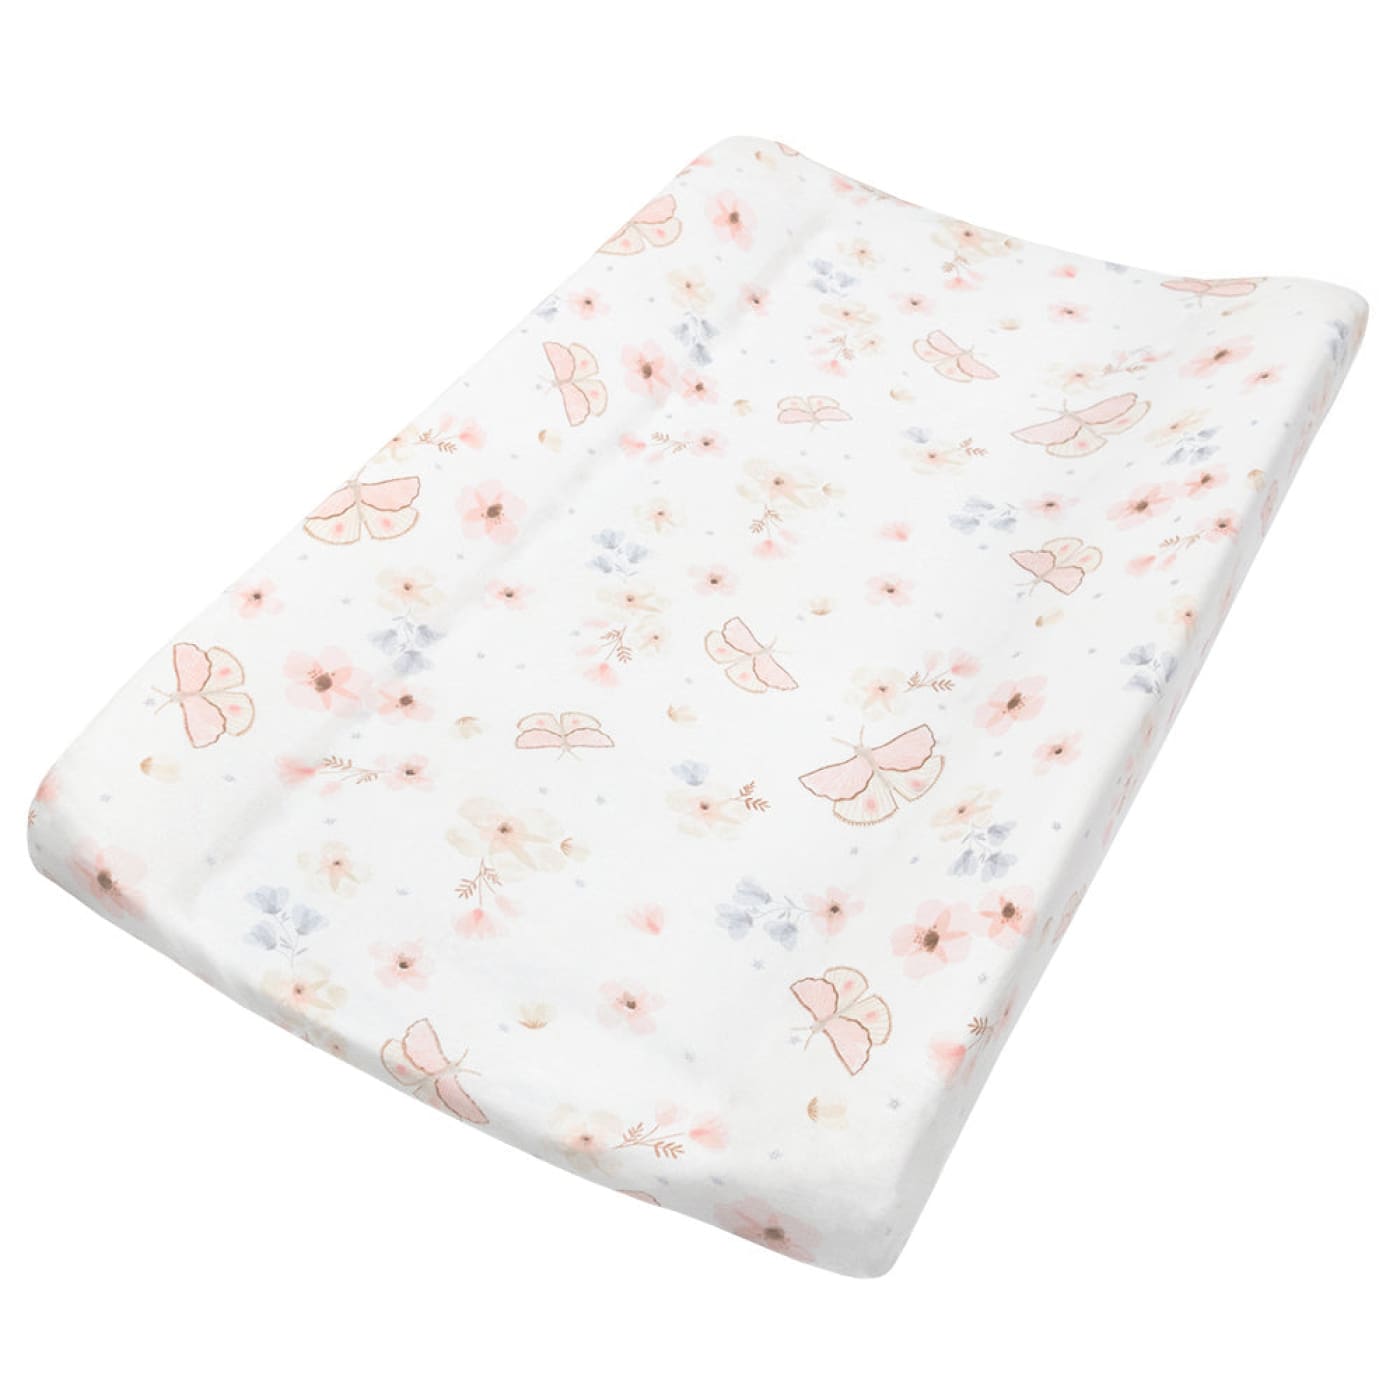 Living Textiles Jersey Change Pad Cover & Liner Set - Butterfly Garden - Butterfly Garden - BATHTIME & CHANGING - CHANGE MATS/COVERS